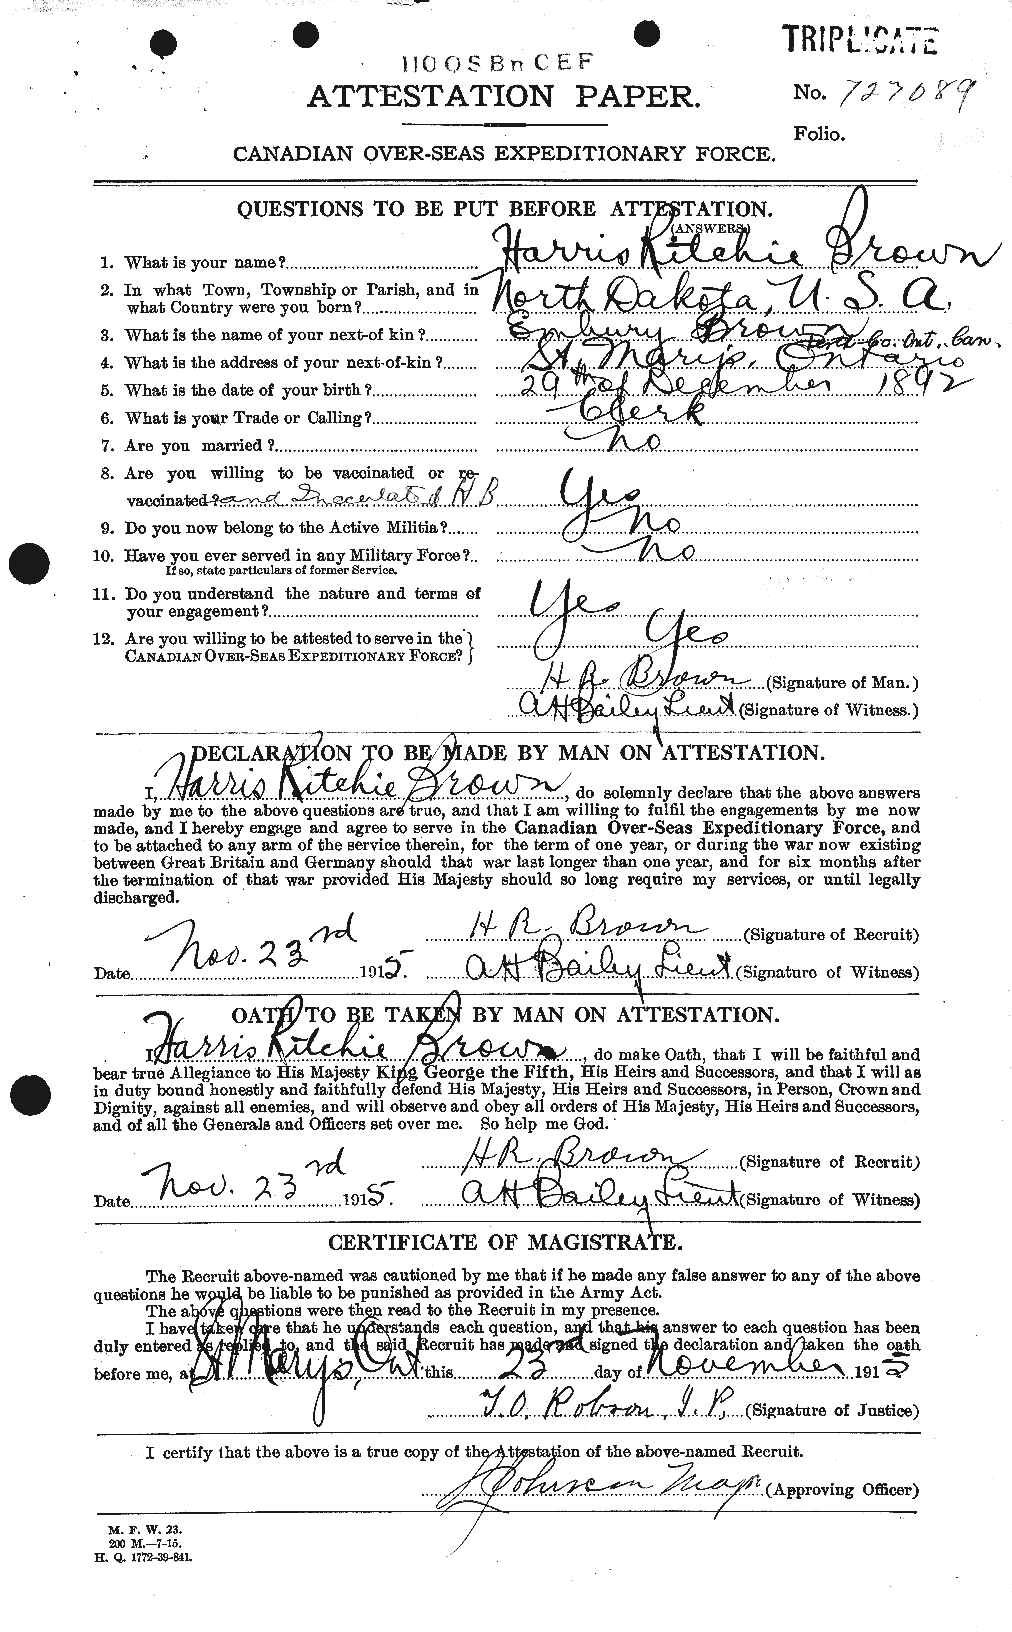 Personnel Records of the First World War - CEF 265380a